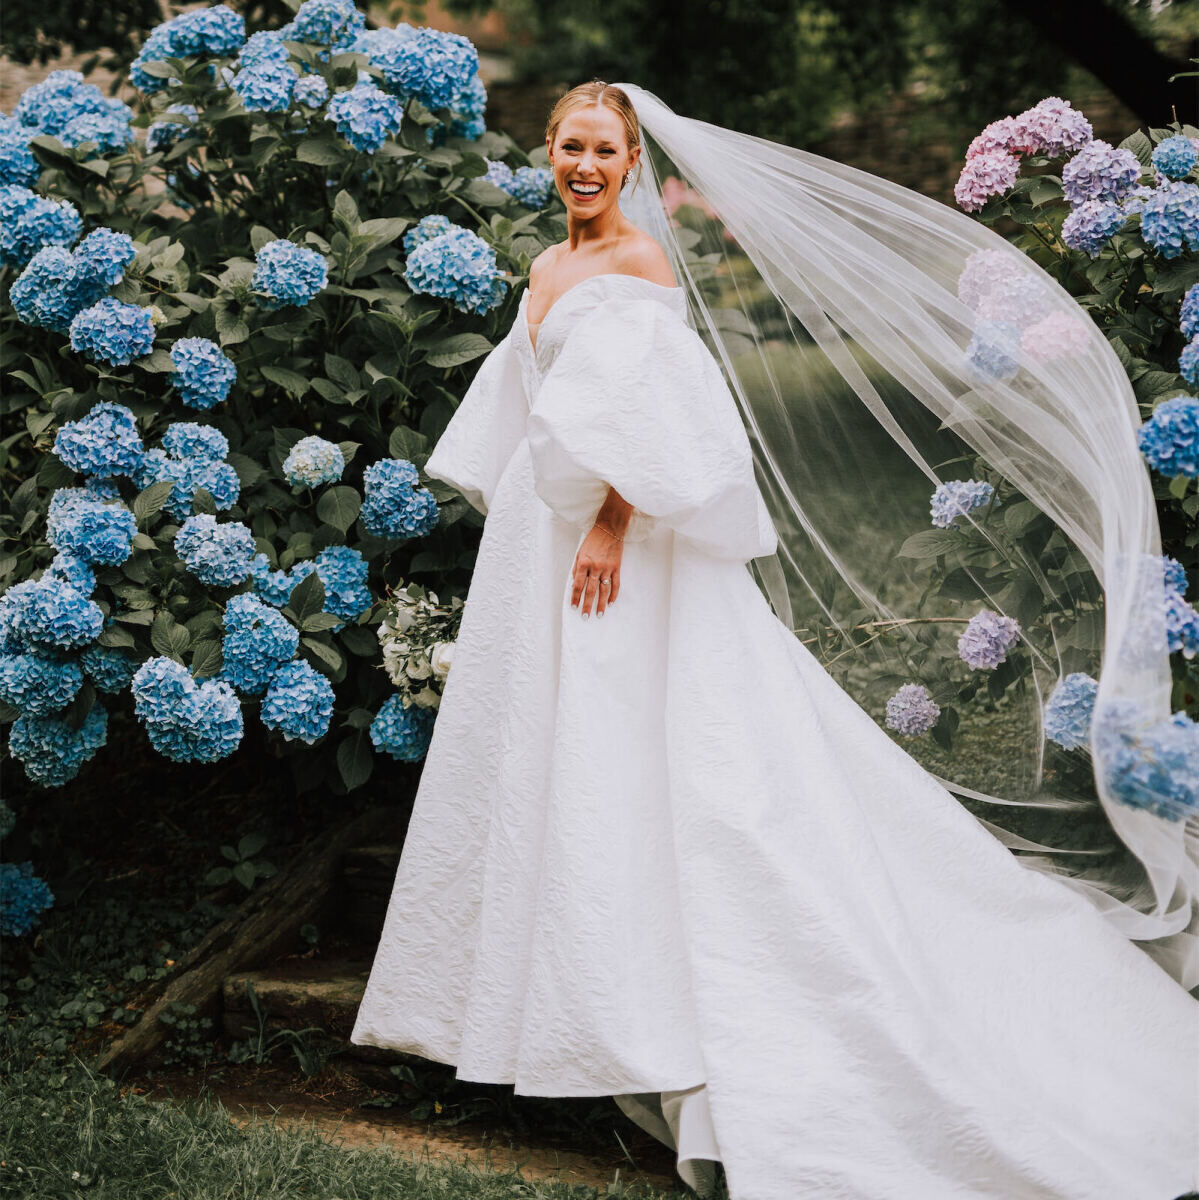 The Toilet Paper Wedding Dress Contest ROLLS OUT Once Again to find the  Most Incredible TP Wedding Dress Design in the Country! | Business Wire